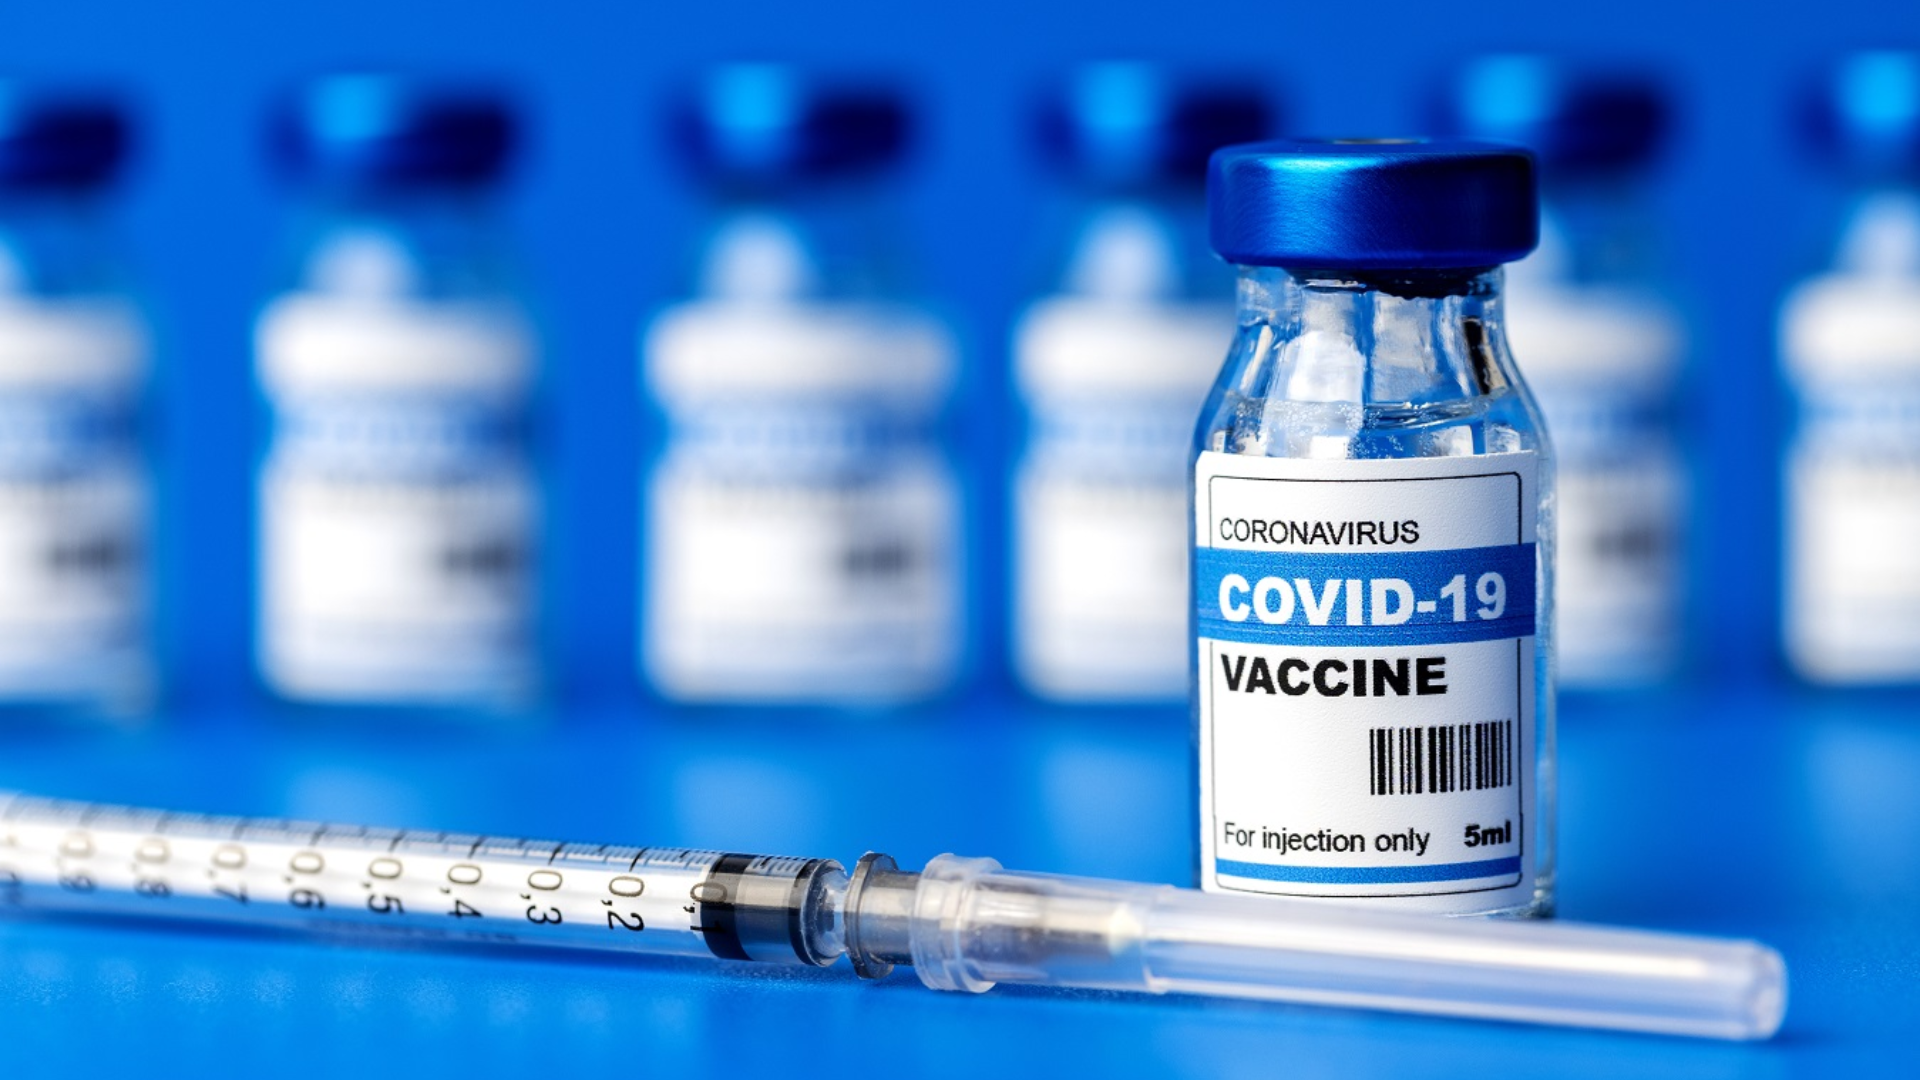 Study Reveals German Man Administers Over 200 COVID-19 Vaccine Shots With No Adverse Reactions